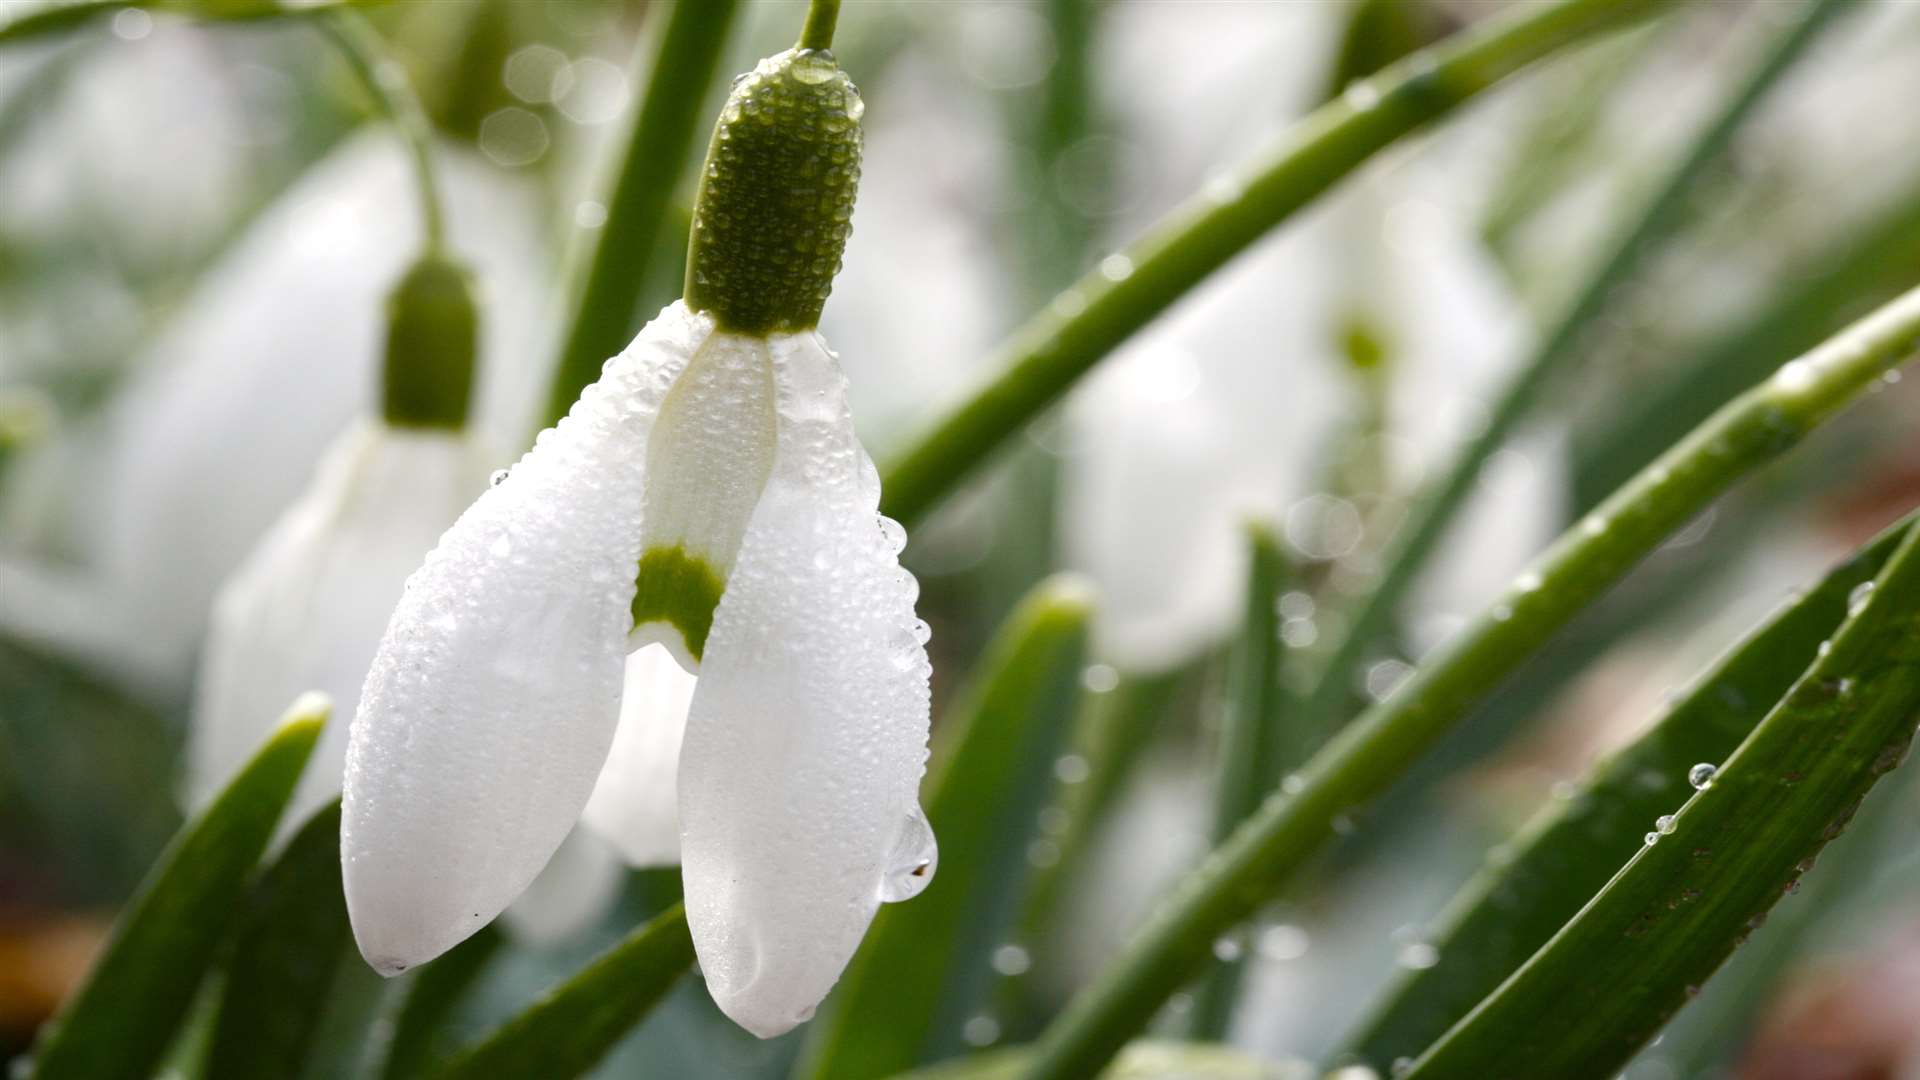 It's early, but there are opportunities to see snowdrops across Kent in February